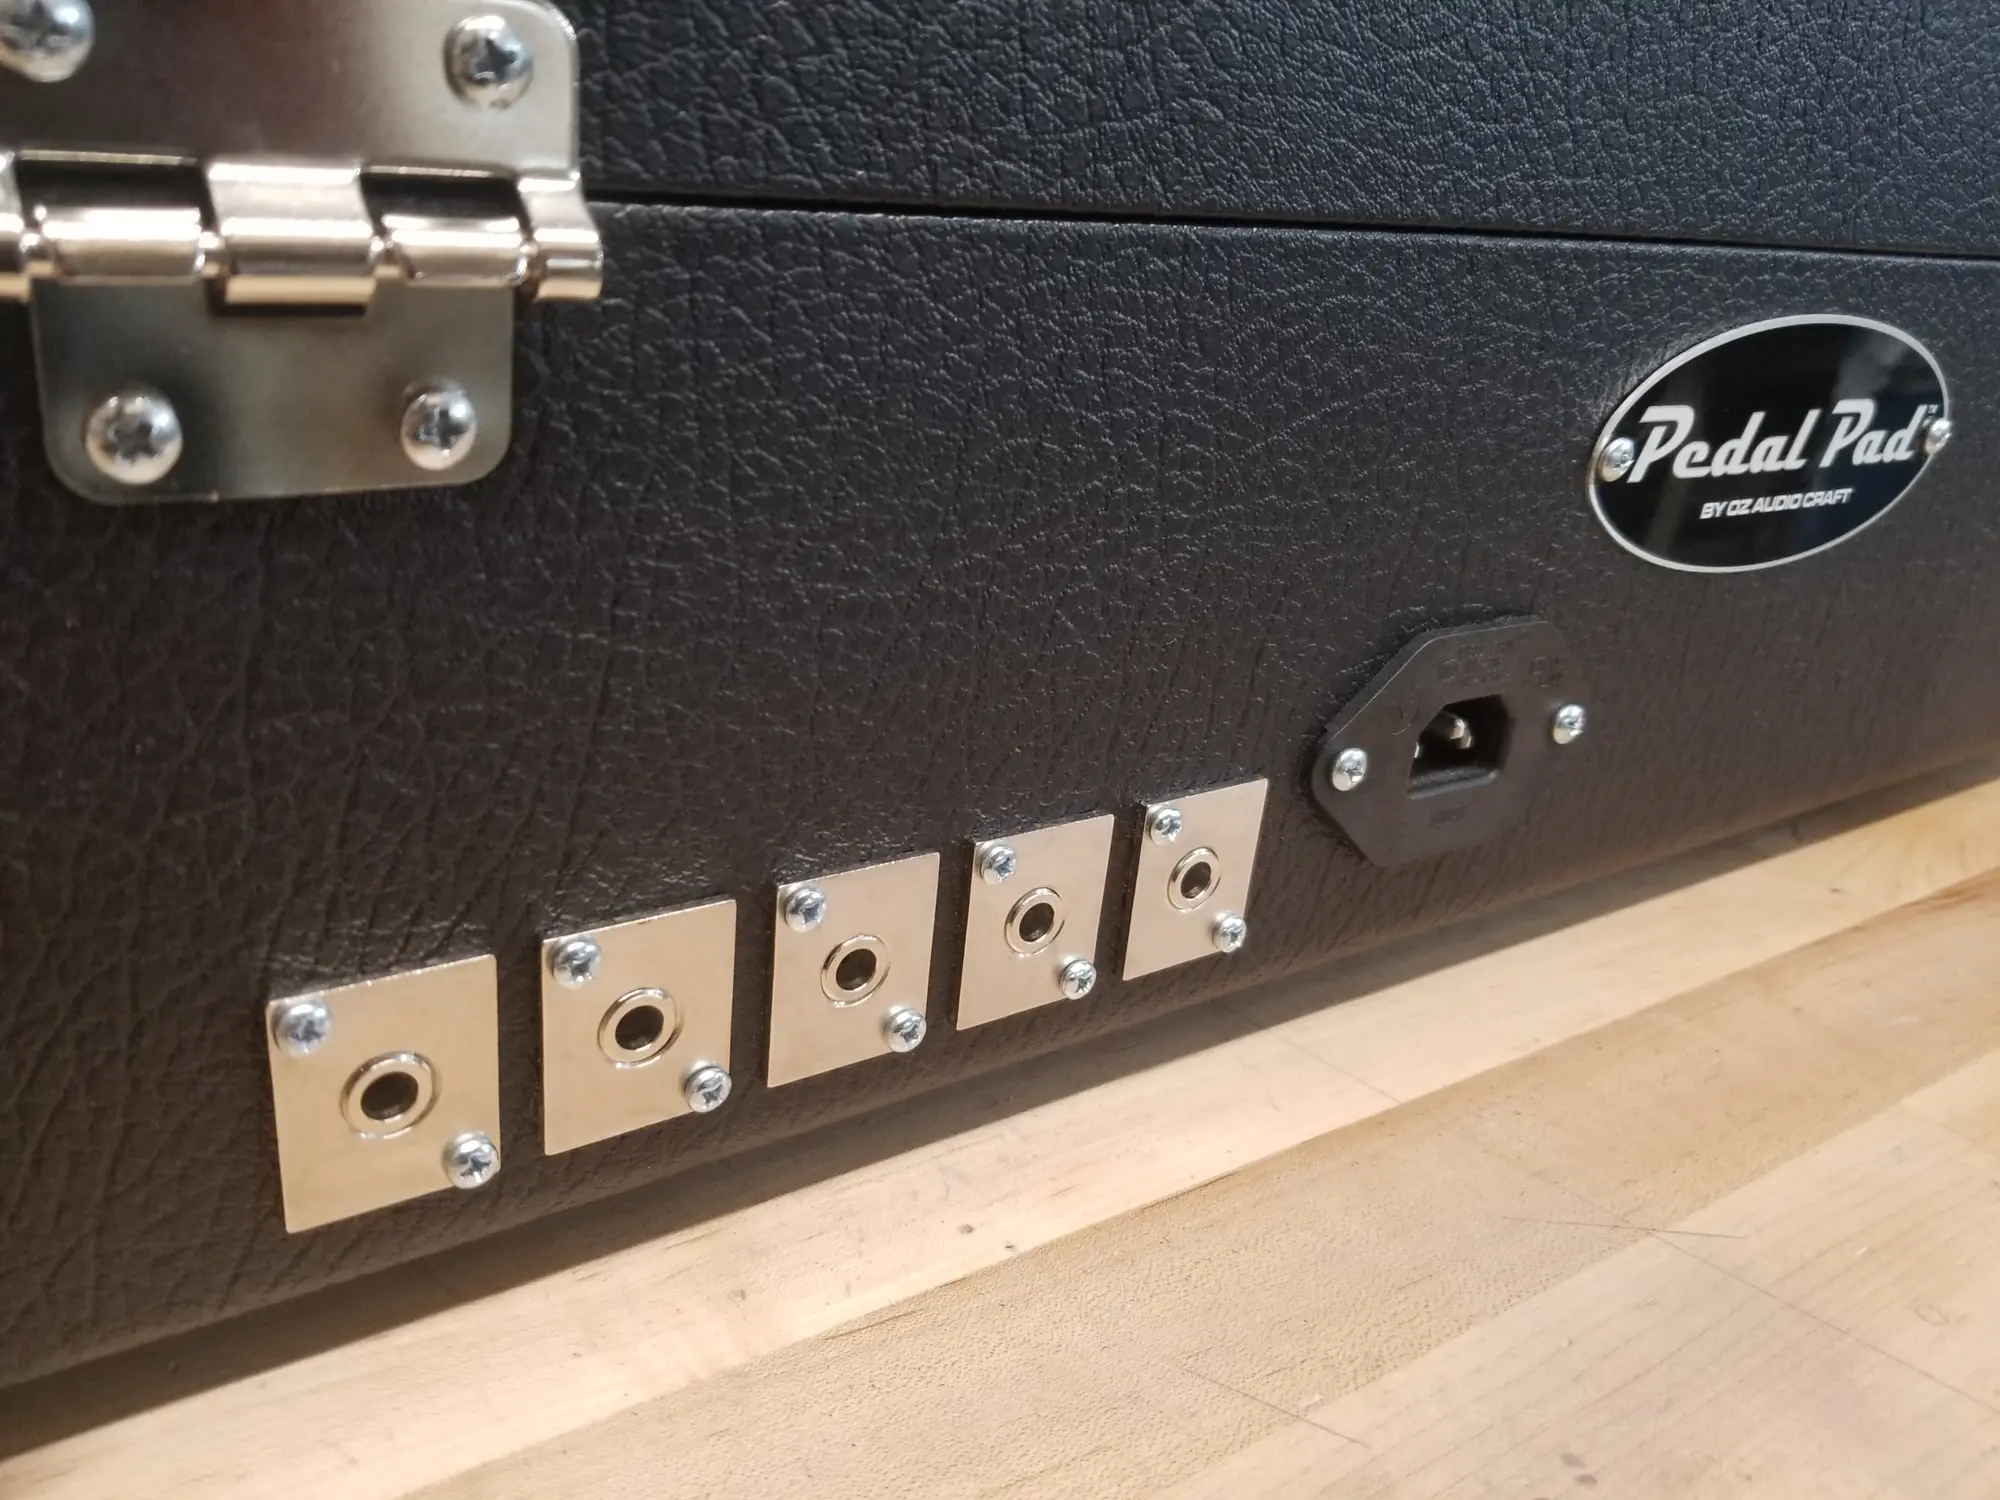 Built-in power inlet and input/output jacks